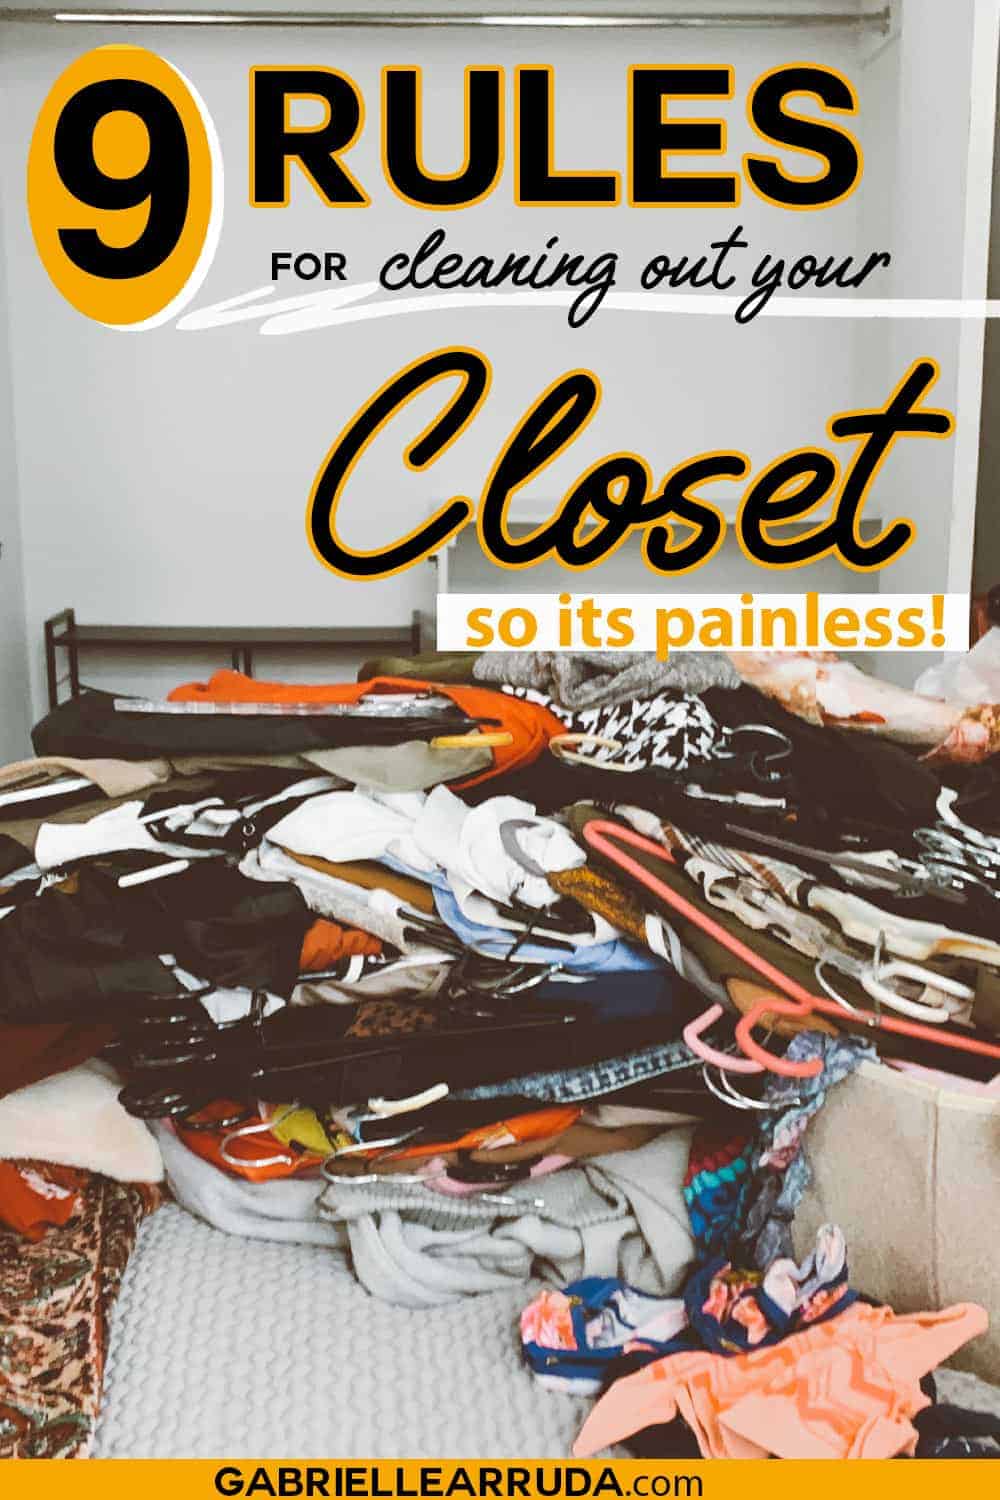 9 rules for cleaning out your closet so it's painless! image of messy clothes everywhere with clean closet in background